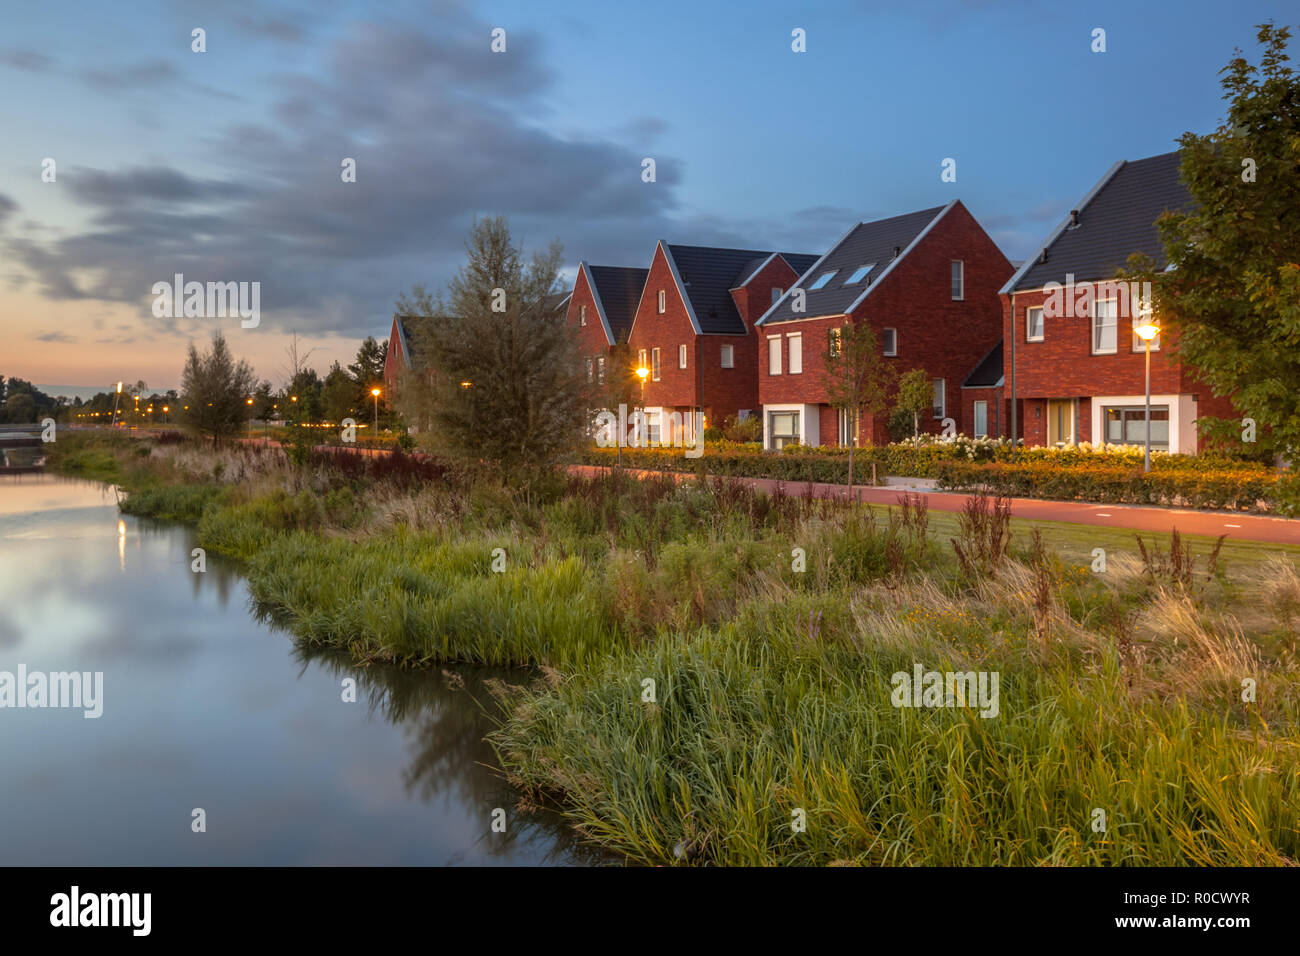 Long exposure night image of a suburban Street with modern ecological middle class family houses with eco friendly river bank in Veenendaal city, Neth Stock Photo